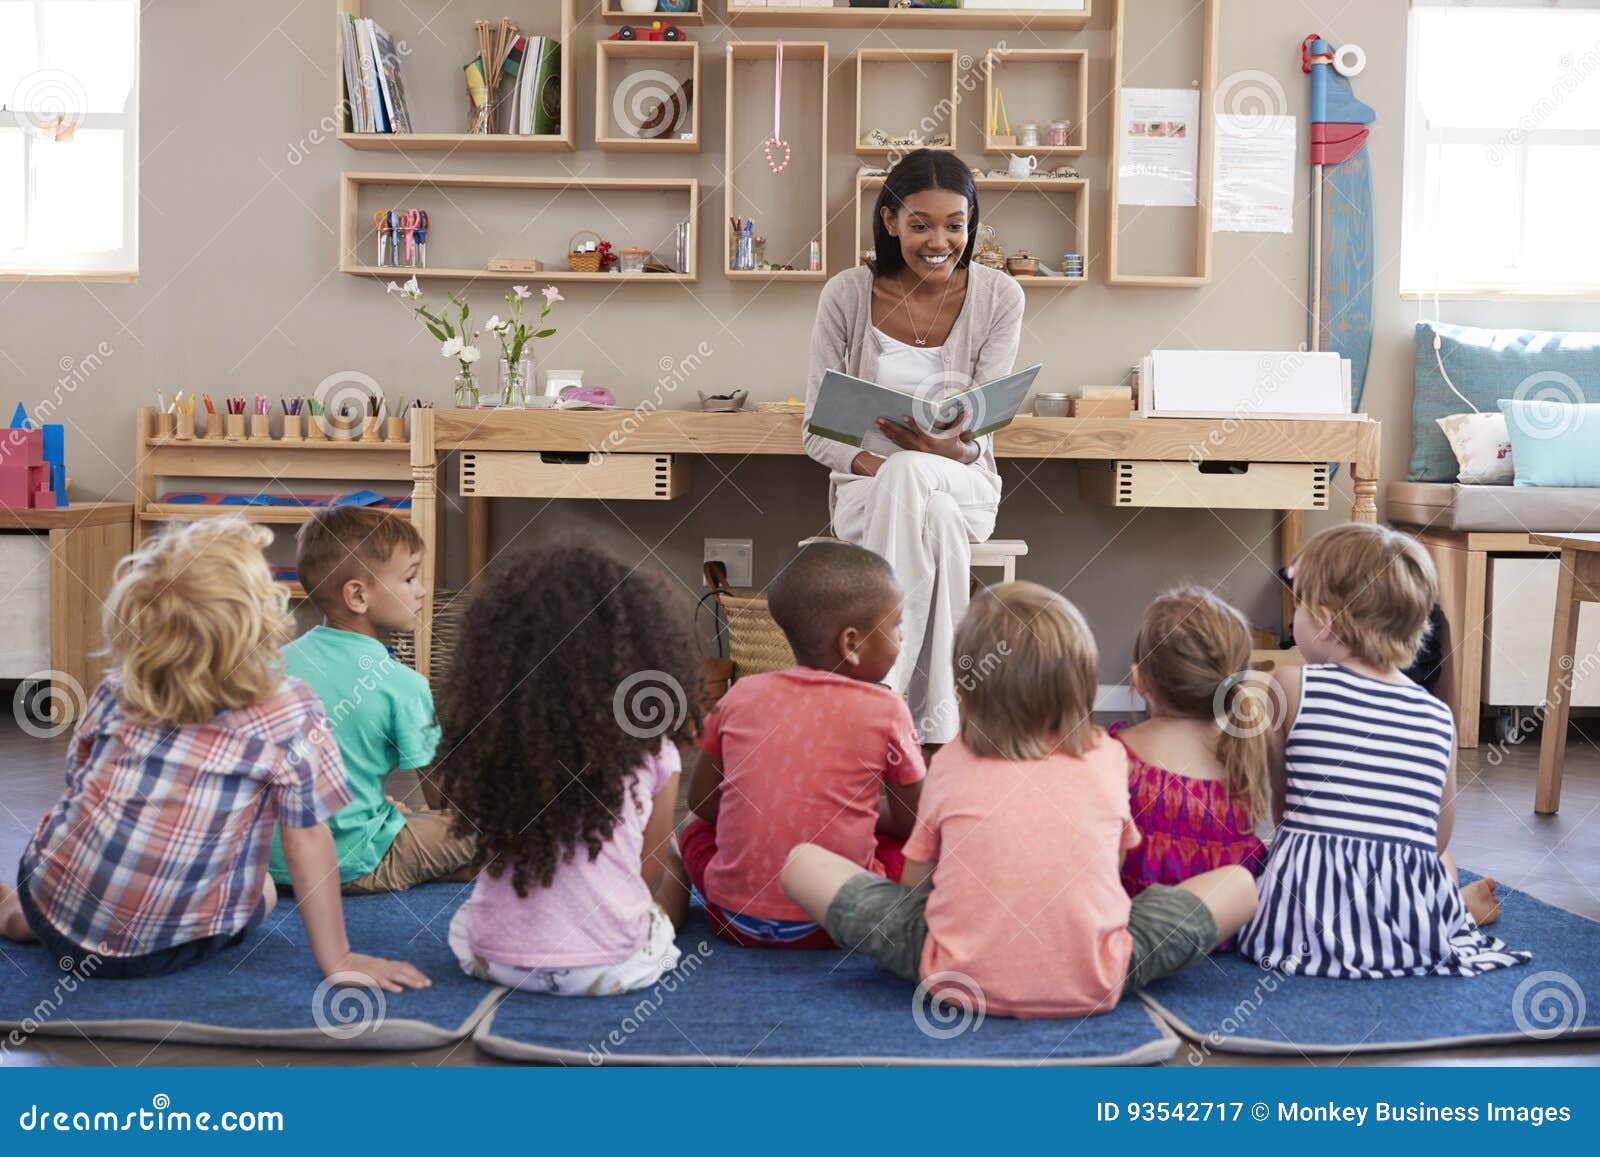 teacher at montessori school reading to children at story time